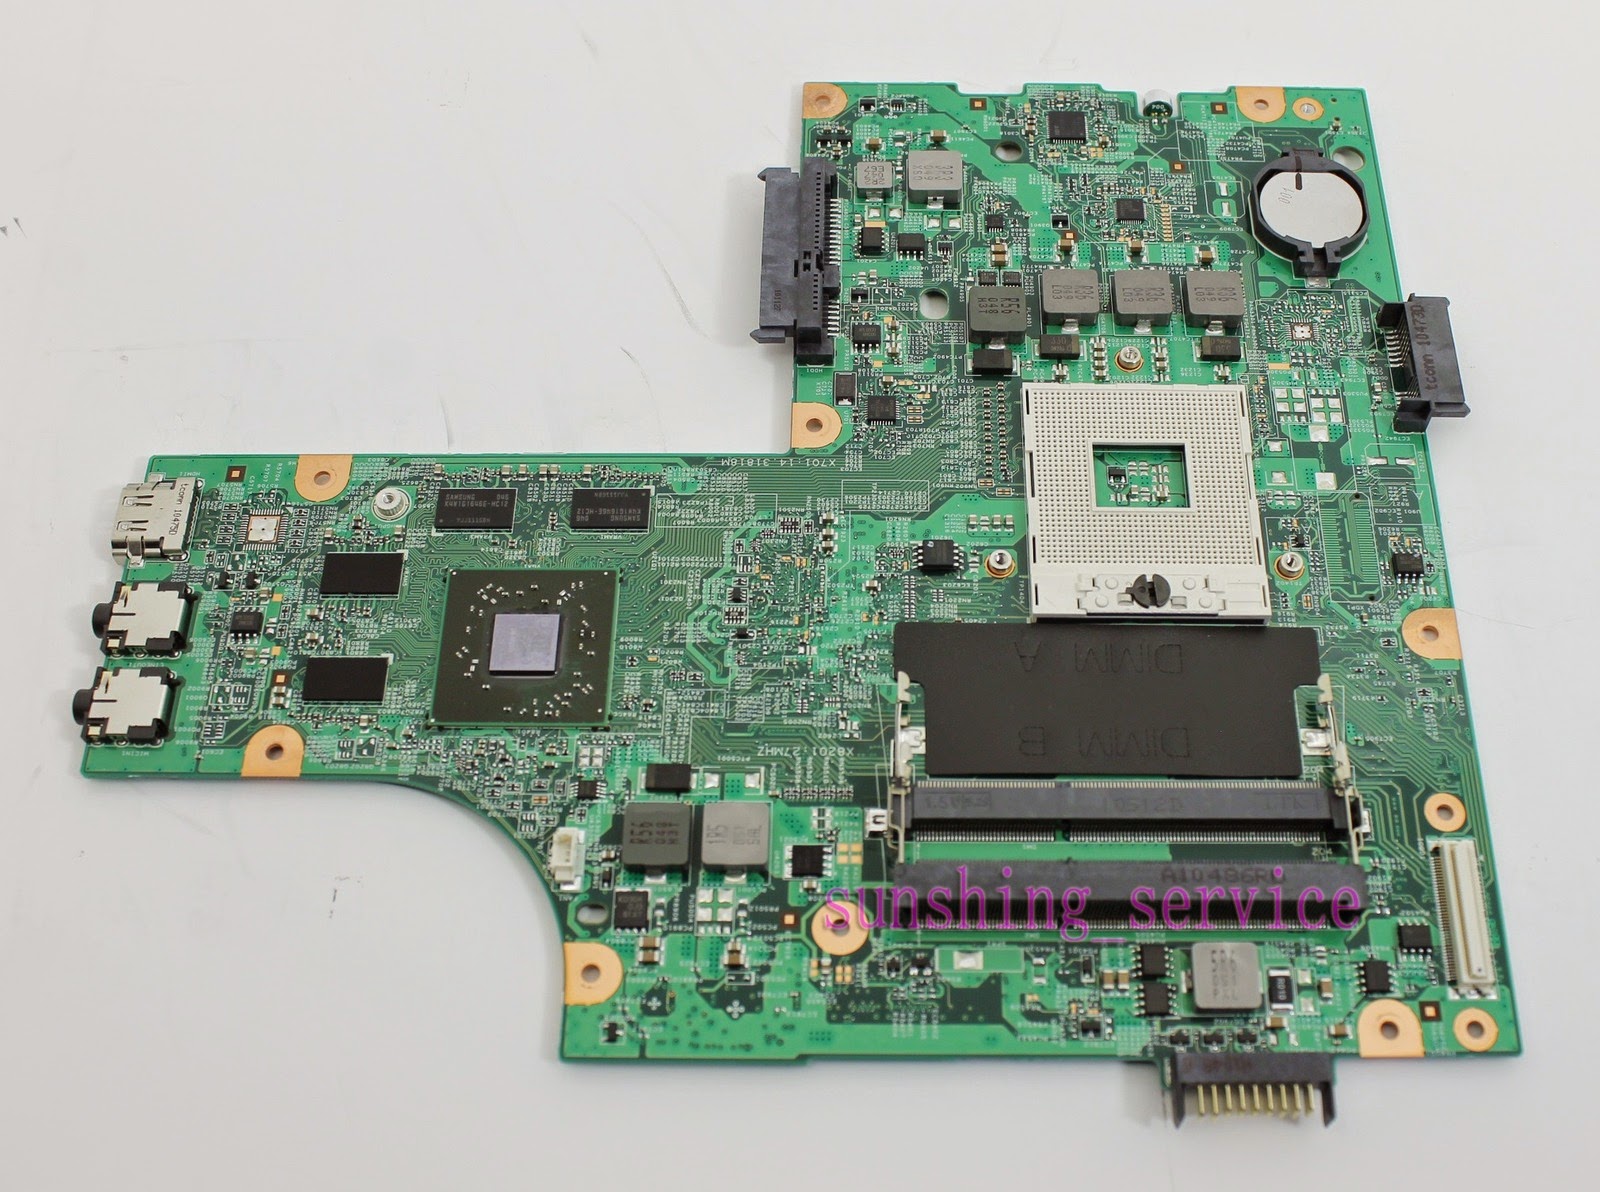 dell-n5010-wthout-graphic-motherboard.jpg